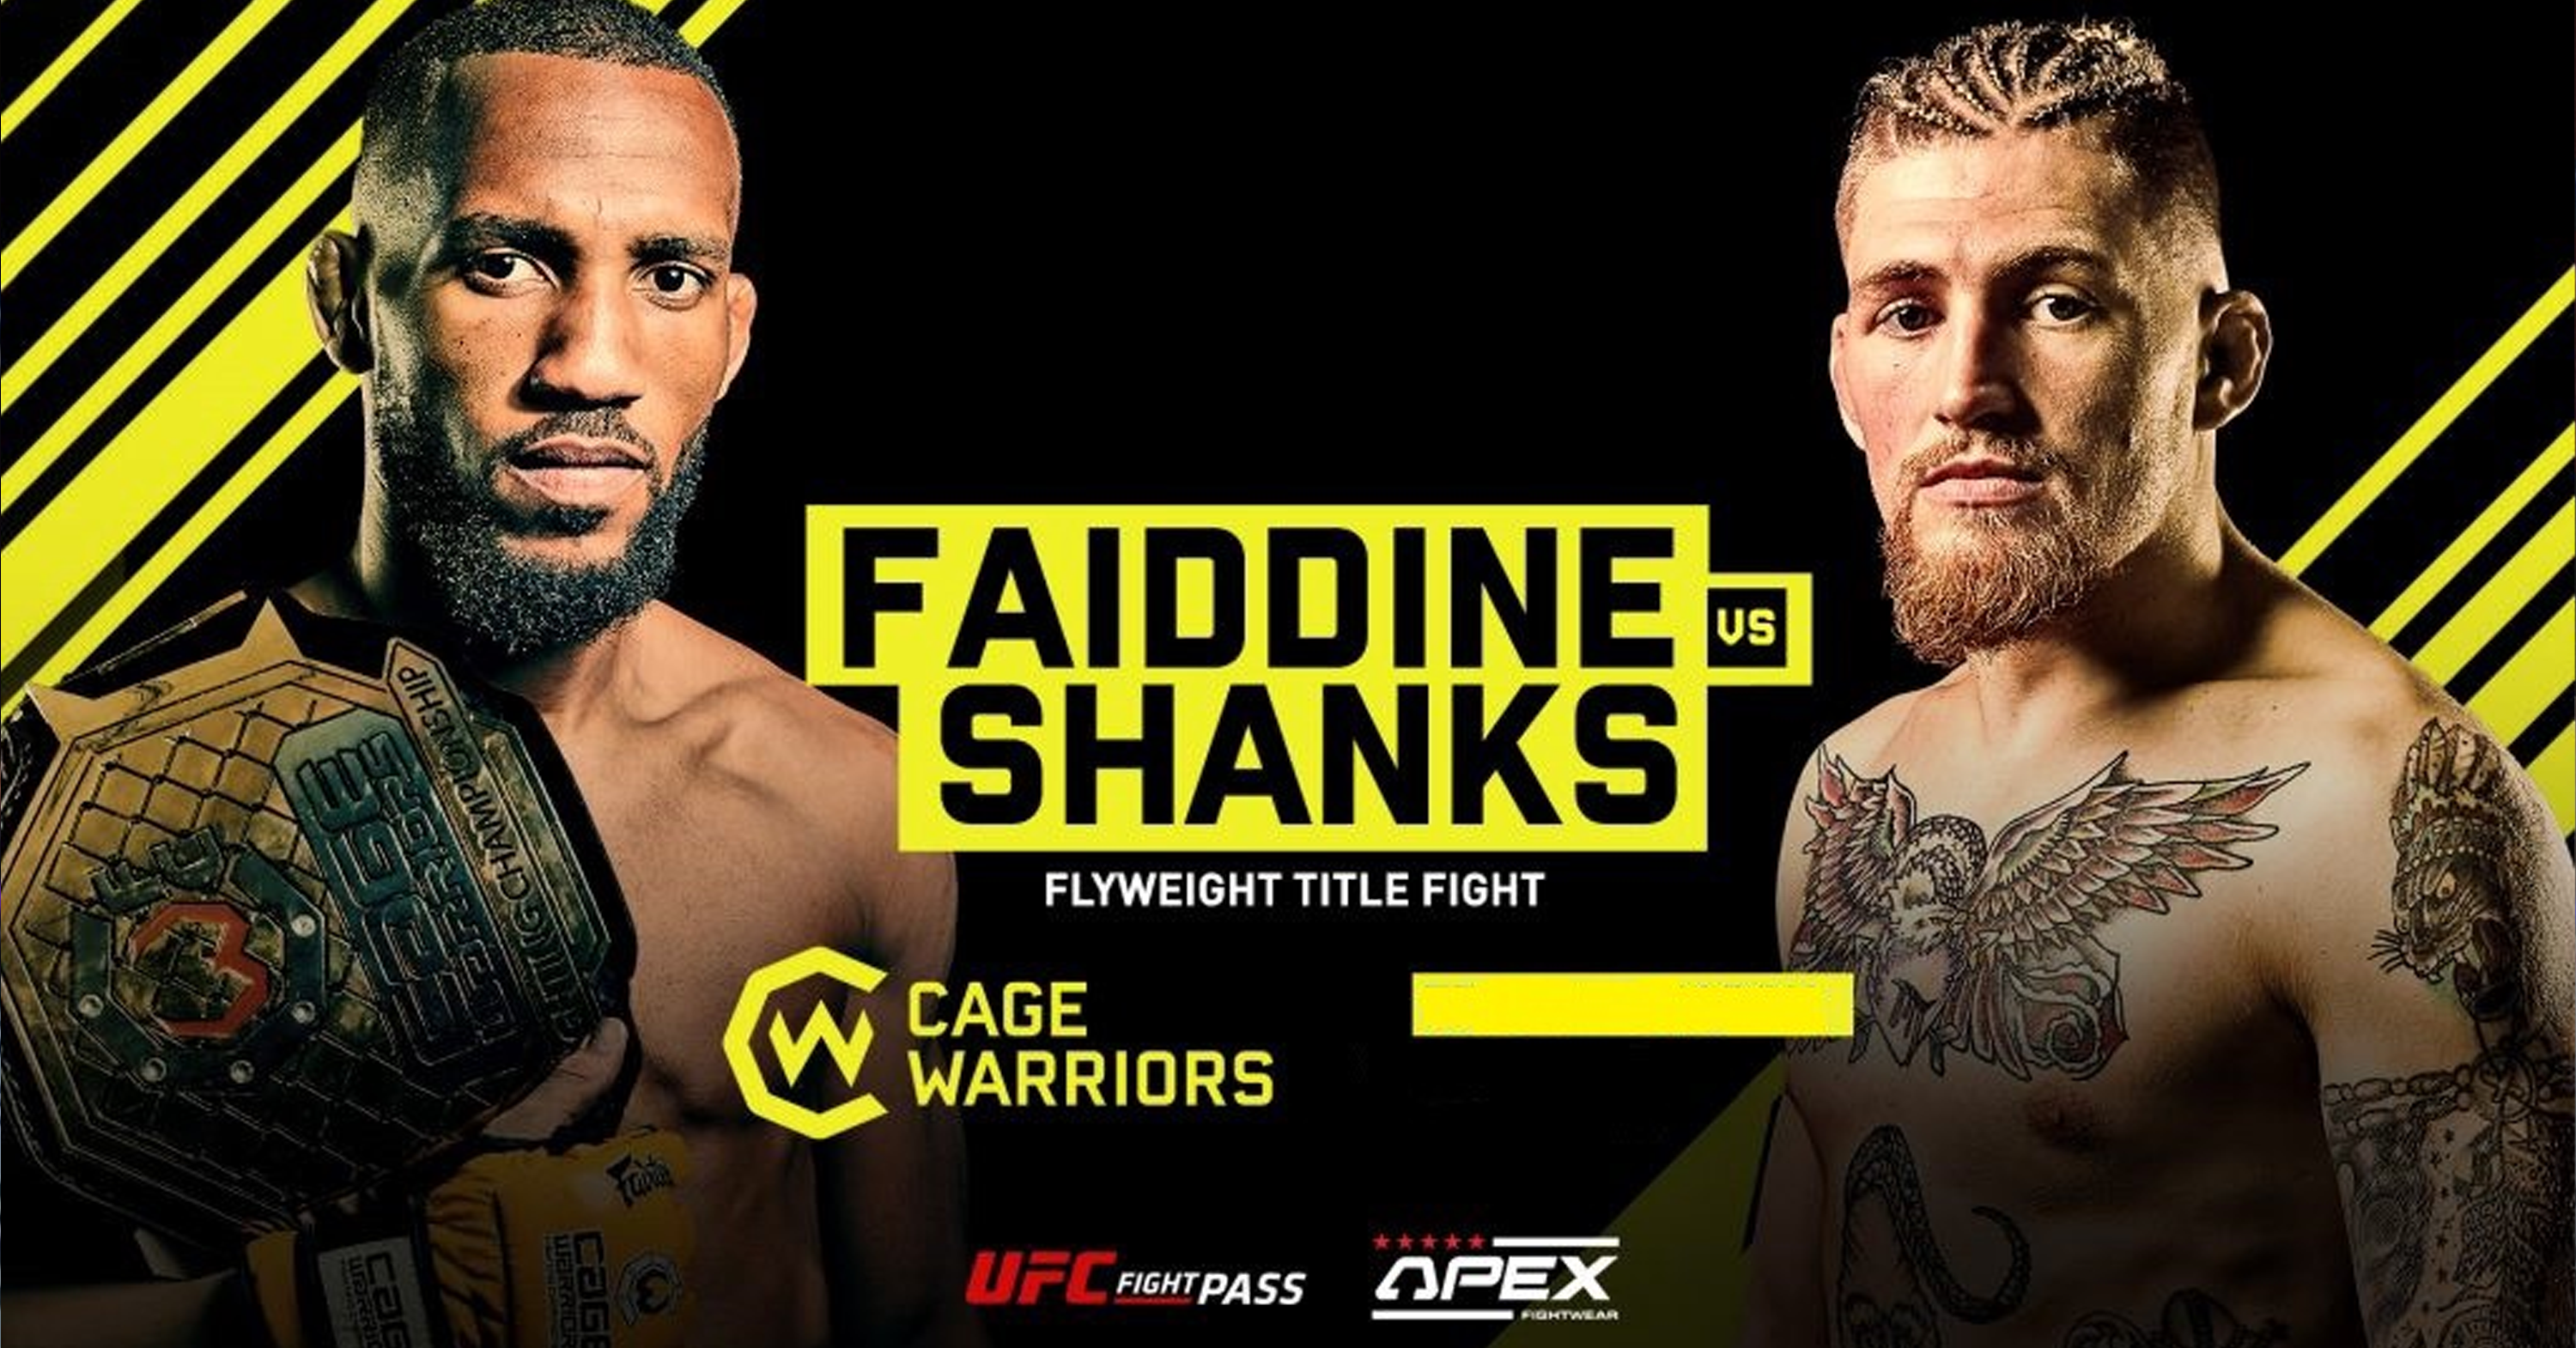 CW114 The Trilogy Faiddine Shanks Cage Warriors flyweight title how to watch preview full fight card